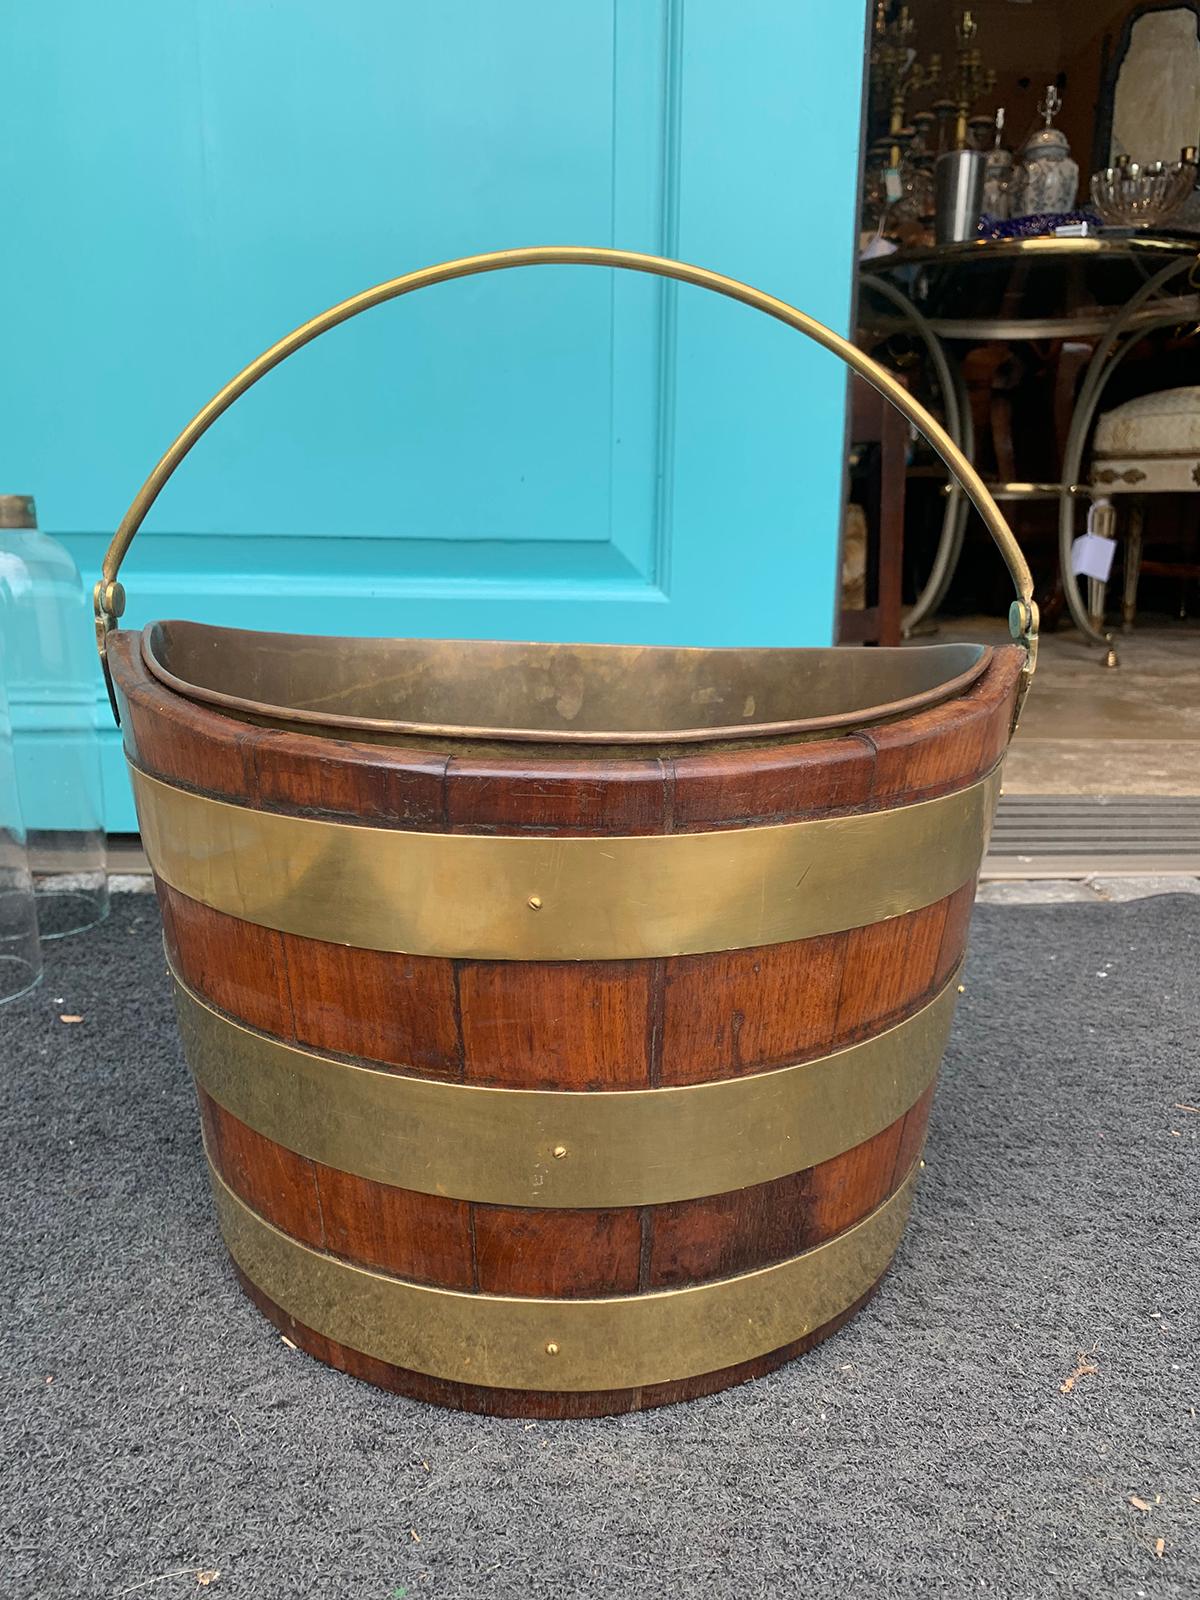 18th-19th century English Navette form brass bound peat bucket
Campaign style.
Measures: 14.5